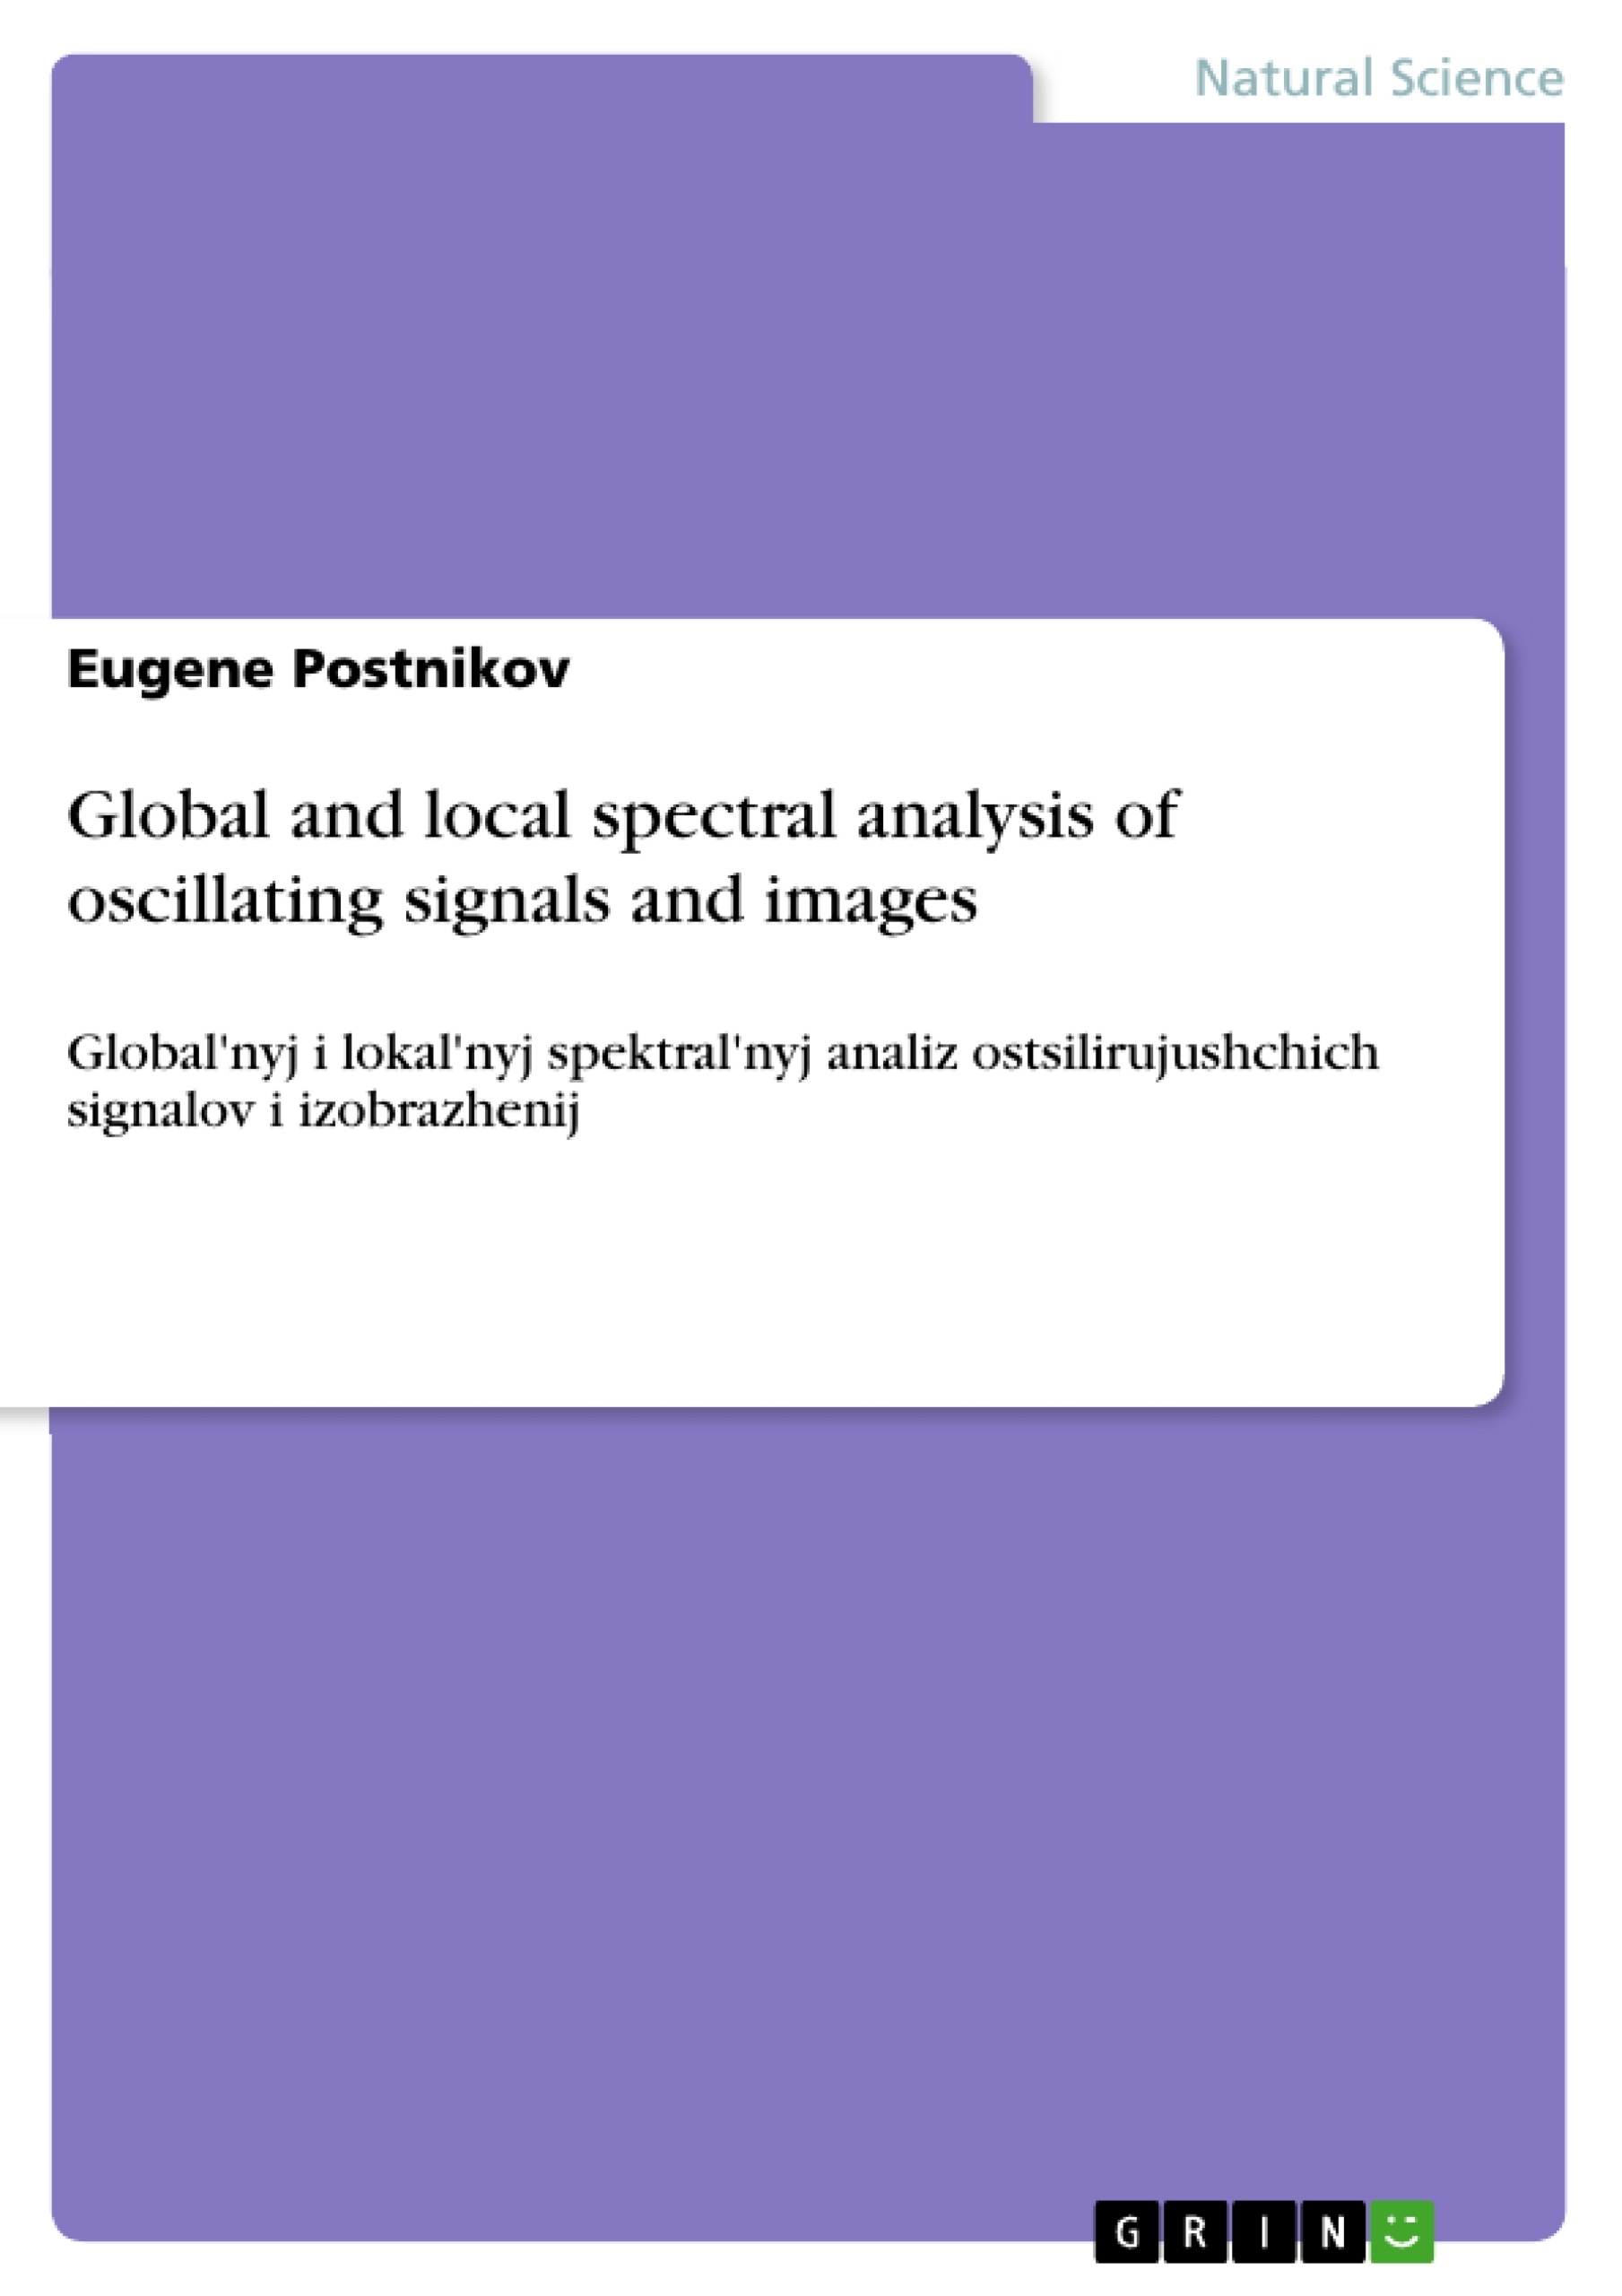 Titel: Global and local spectral analysis of oscillating signals and images